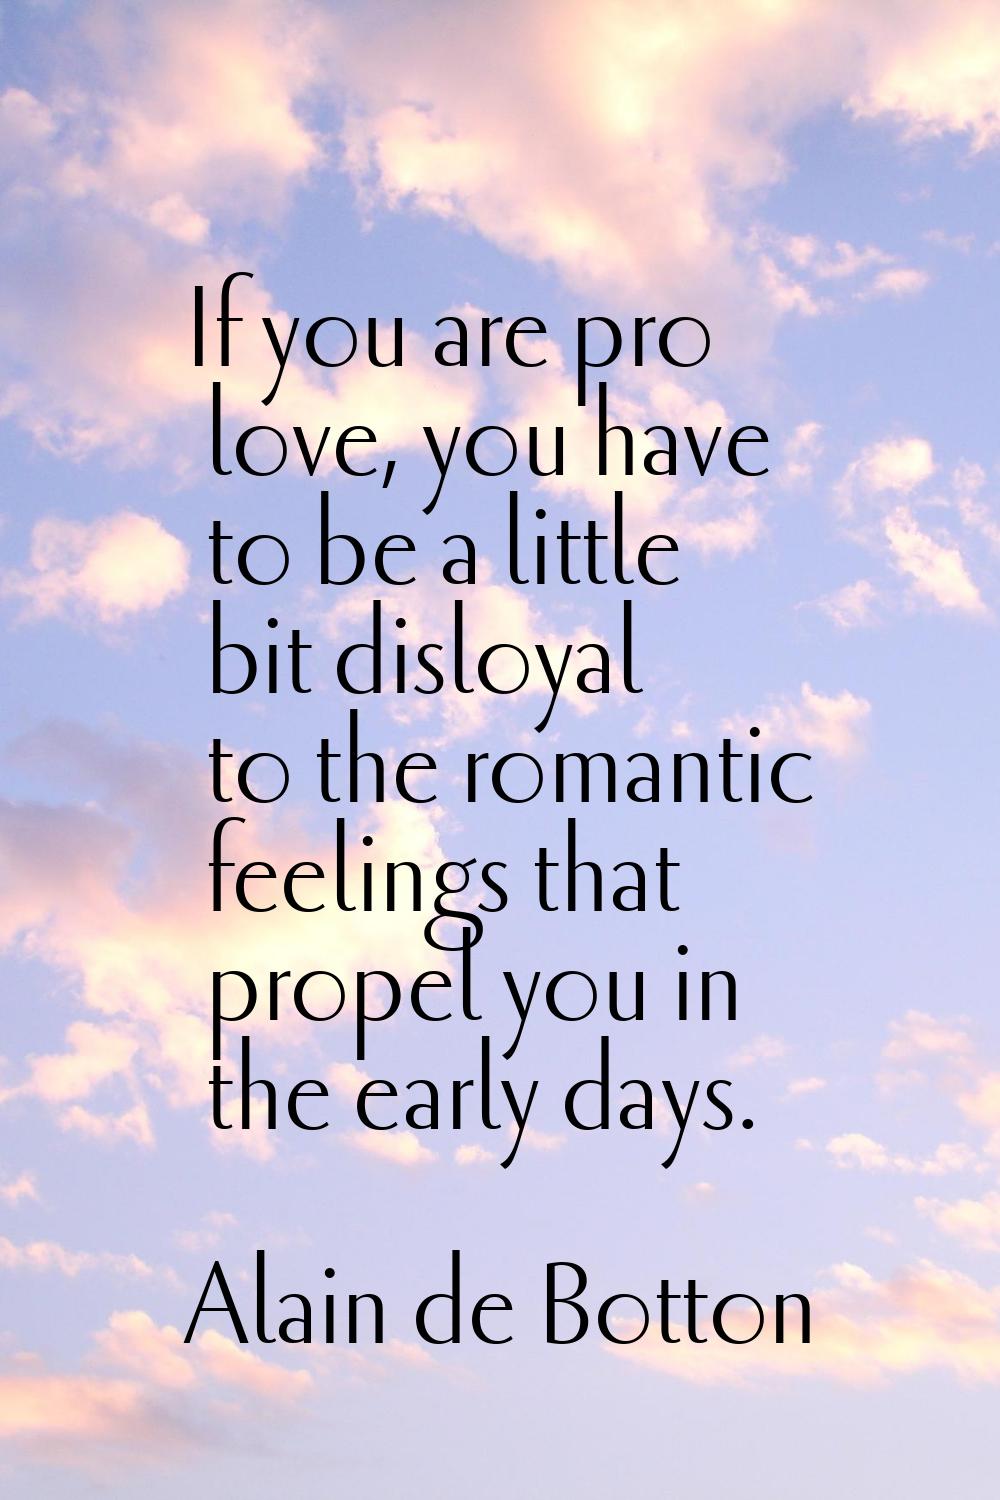 If you are pro love, you have to be a little bit disloyal to the romantic feelings that propel you 